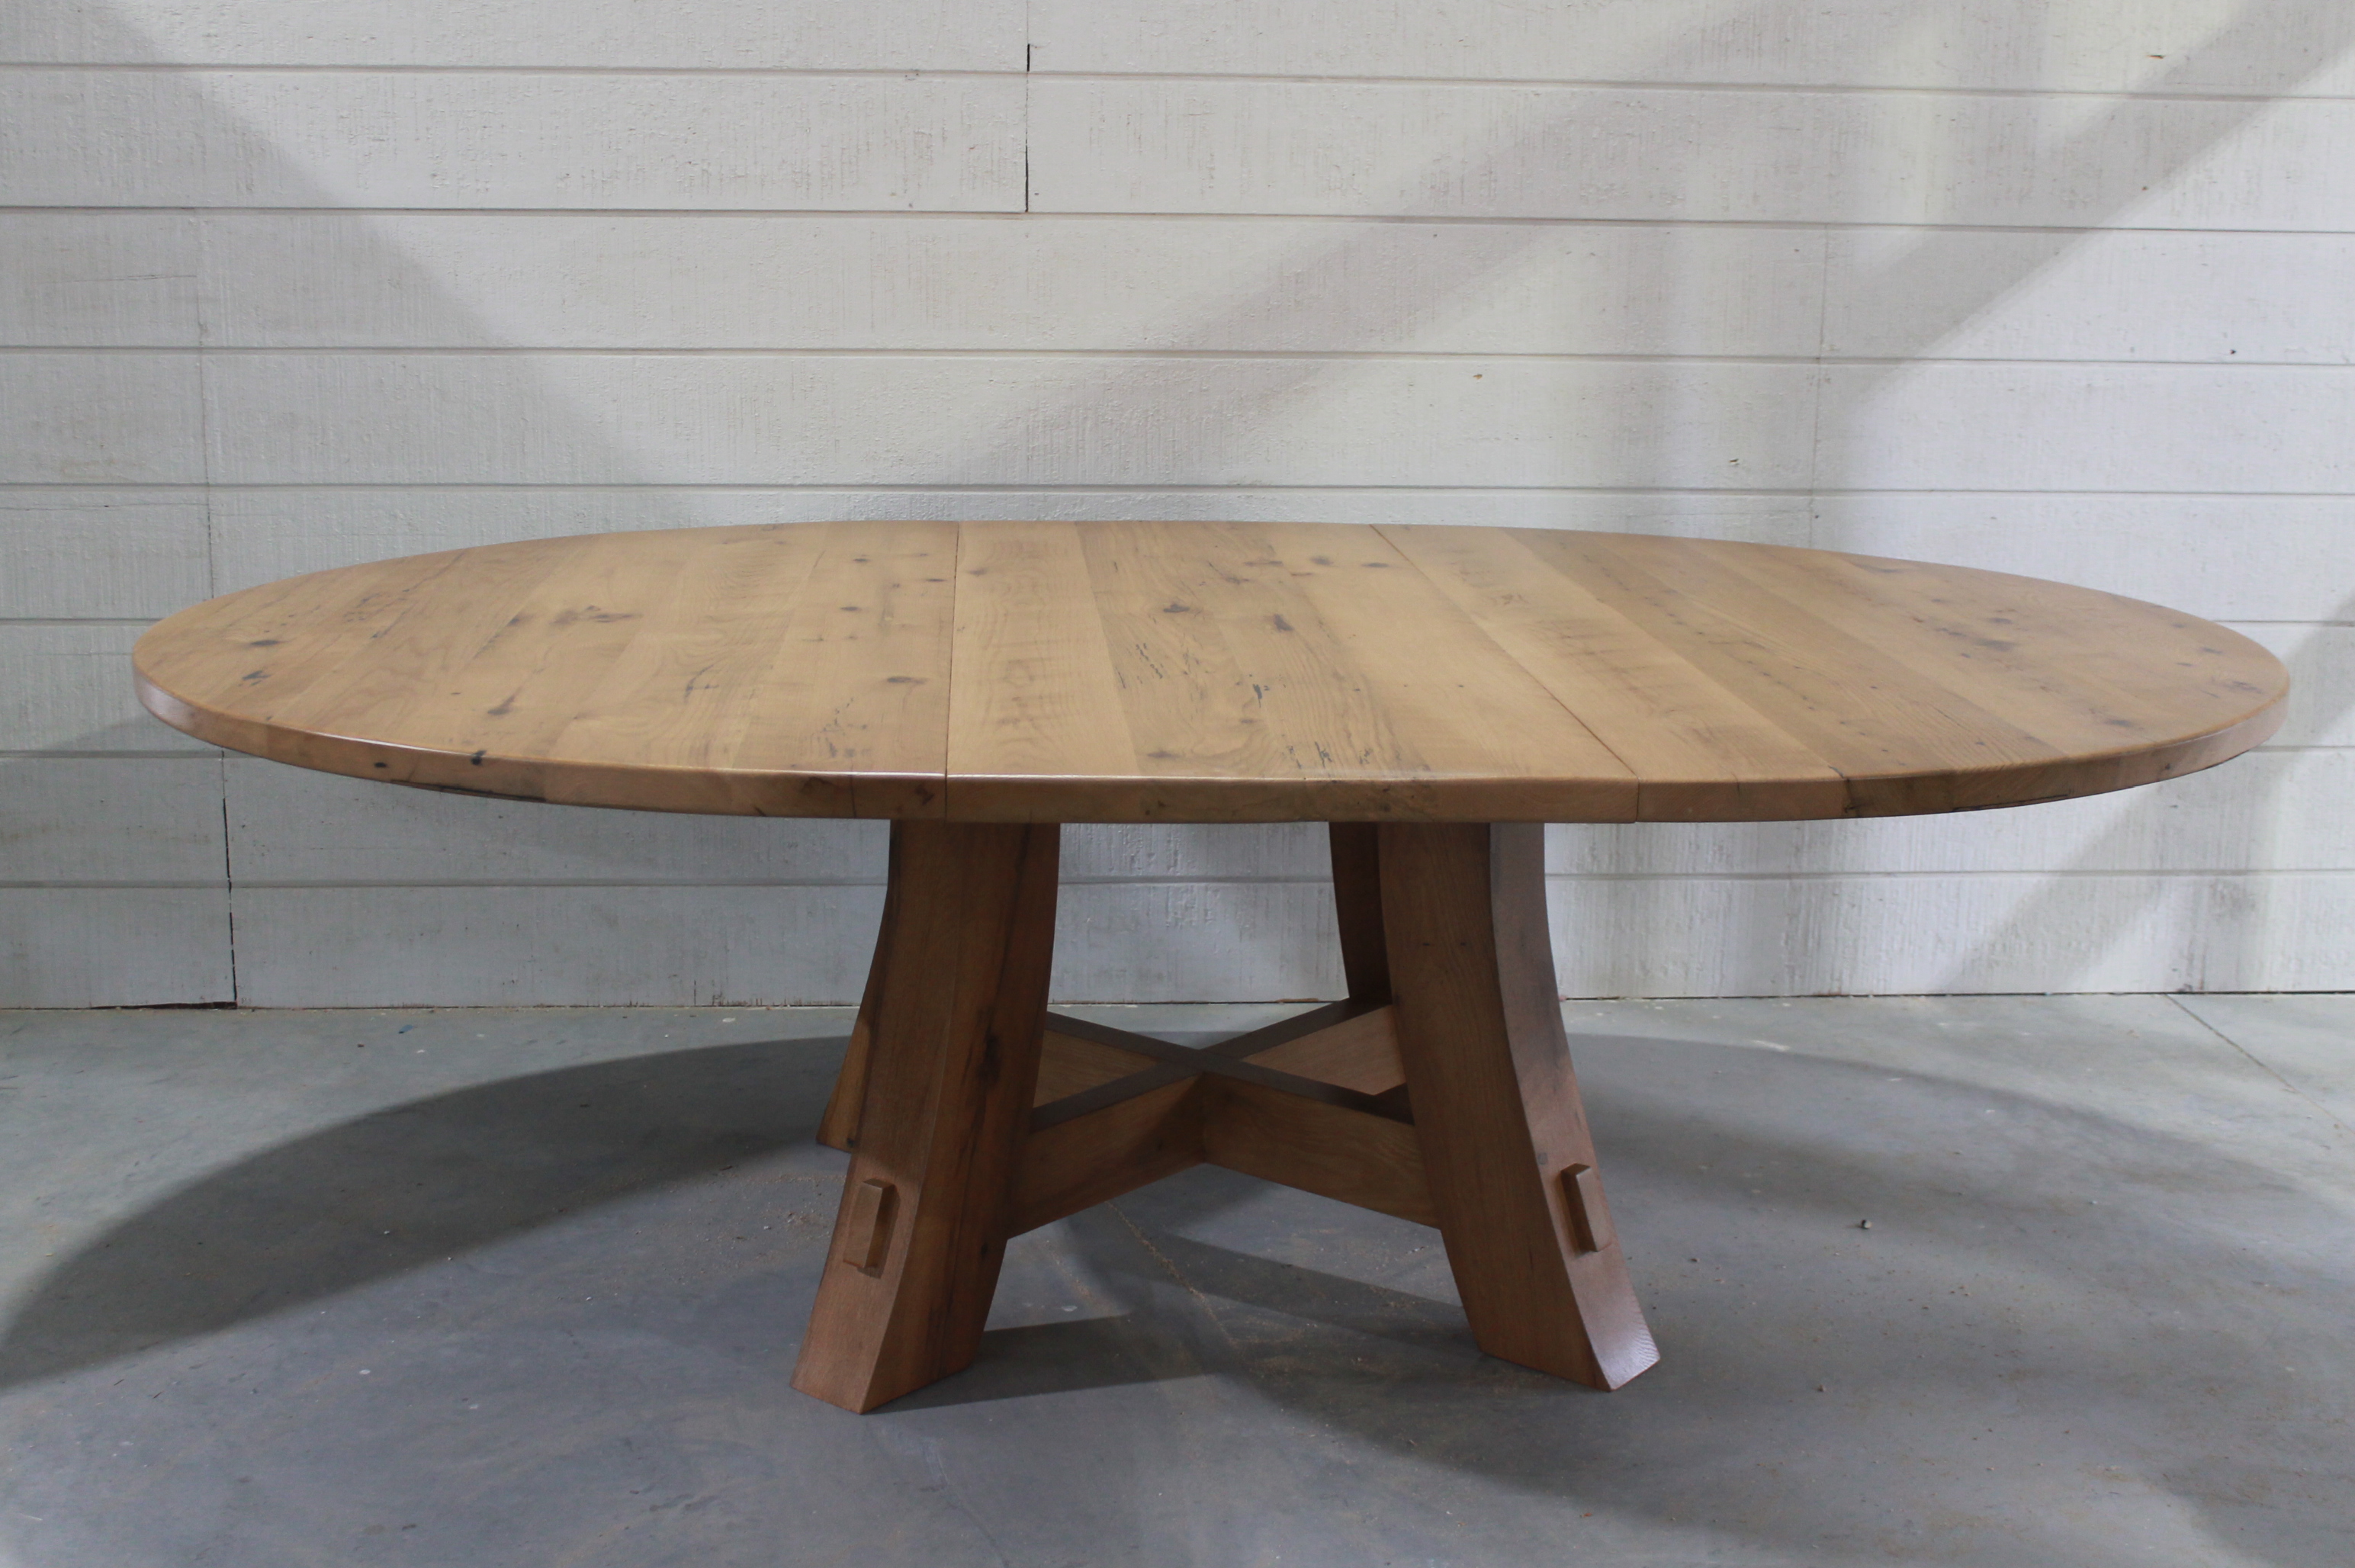 Large Round Reclaimed Oak Table With Modern Pedestal Extension Leafs Up To 24 Wide Sizes Up To 84 Round With Multiple Pedestal Options Call For More Information Custom Pedestals Optional